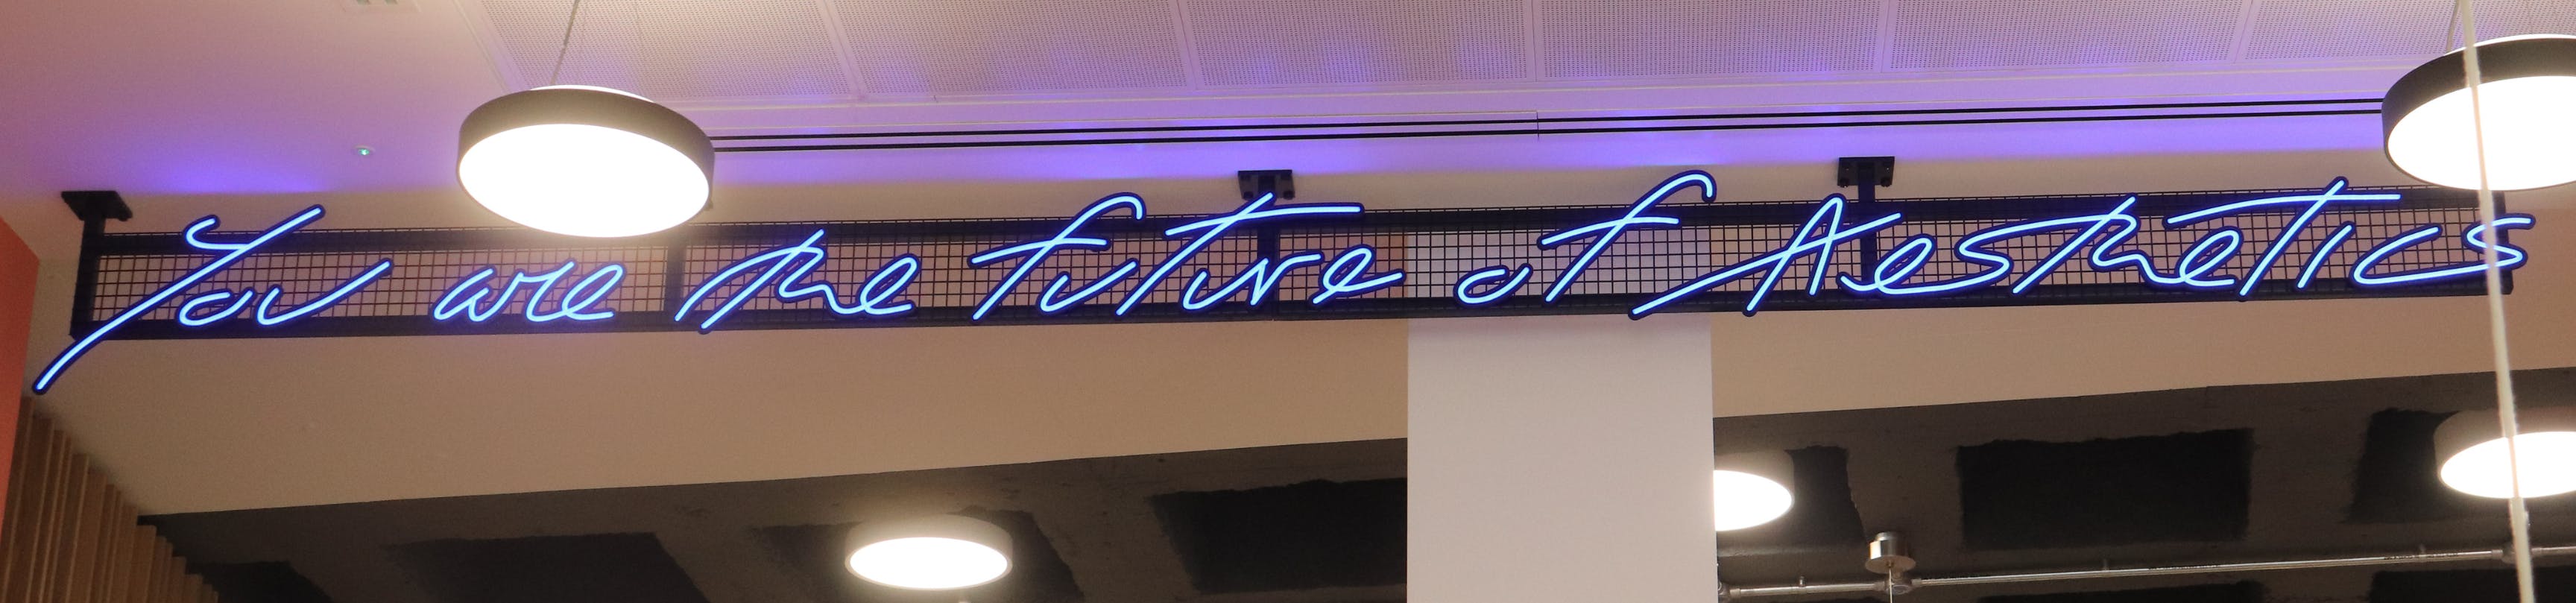 Neon sign that reads You Are the Future of Aesthetics from the lobby of Harley Academy Threadneedle Street an aesthetics training school in the City of London 